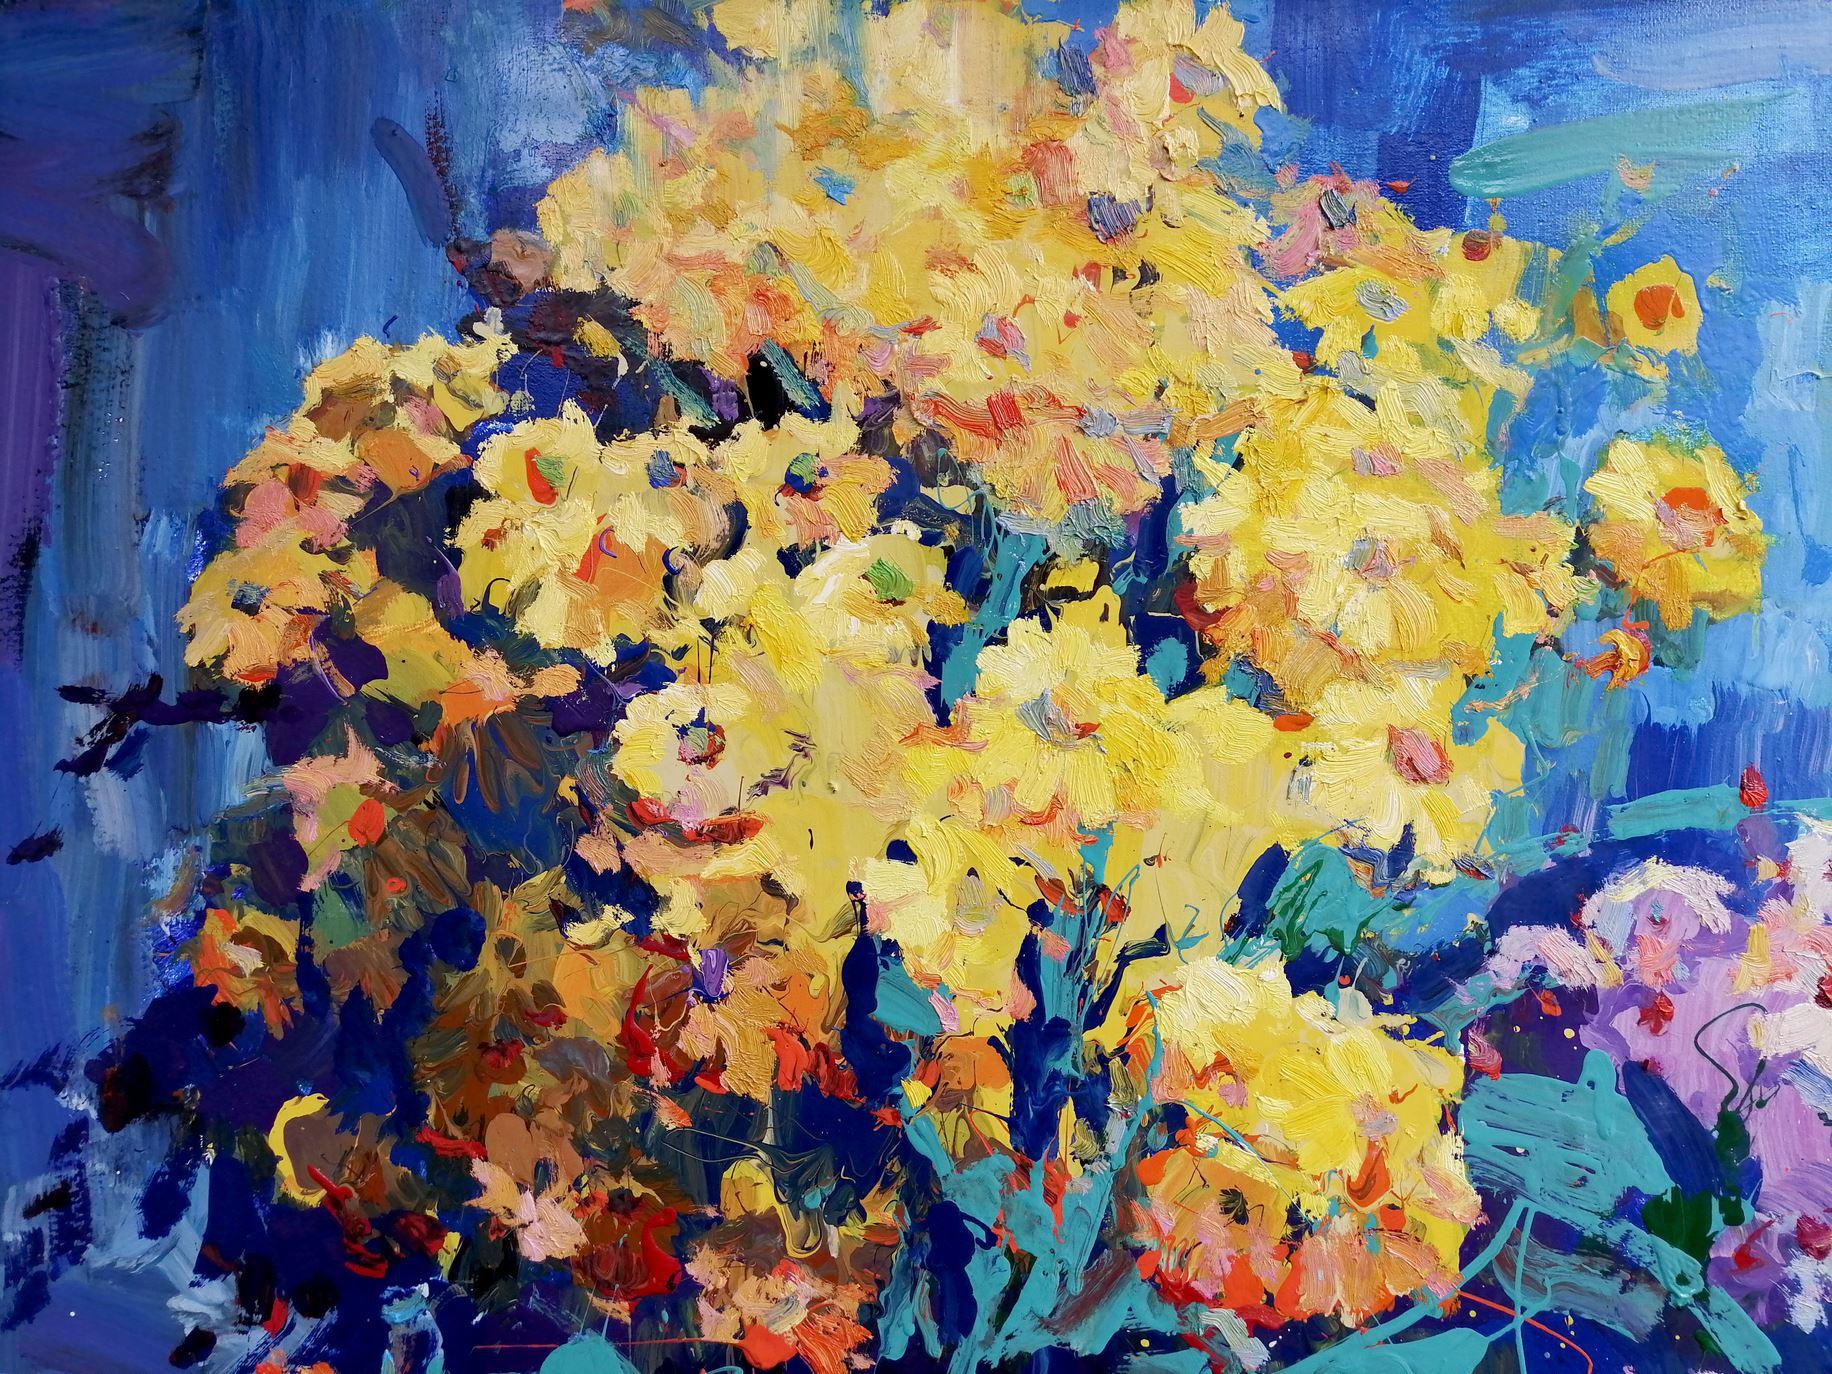 Artist: Alex Kalenyuk 
Work: Original oil painting, handmade artwork, one of a kind 
Medium: Oil on canvas 
Year: 2018
Style: Impressionism
Title: Yellow and Blue, 
Size: 39.5